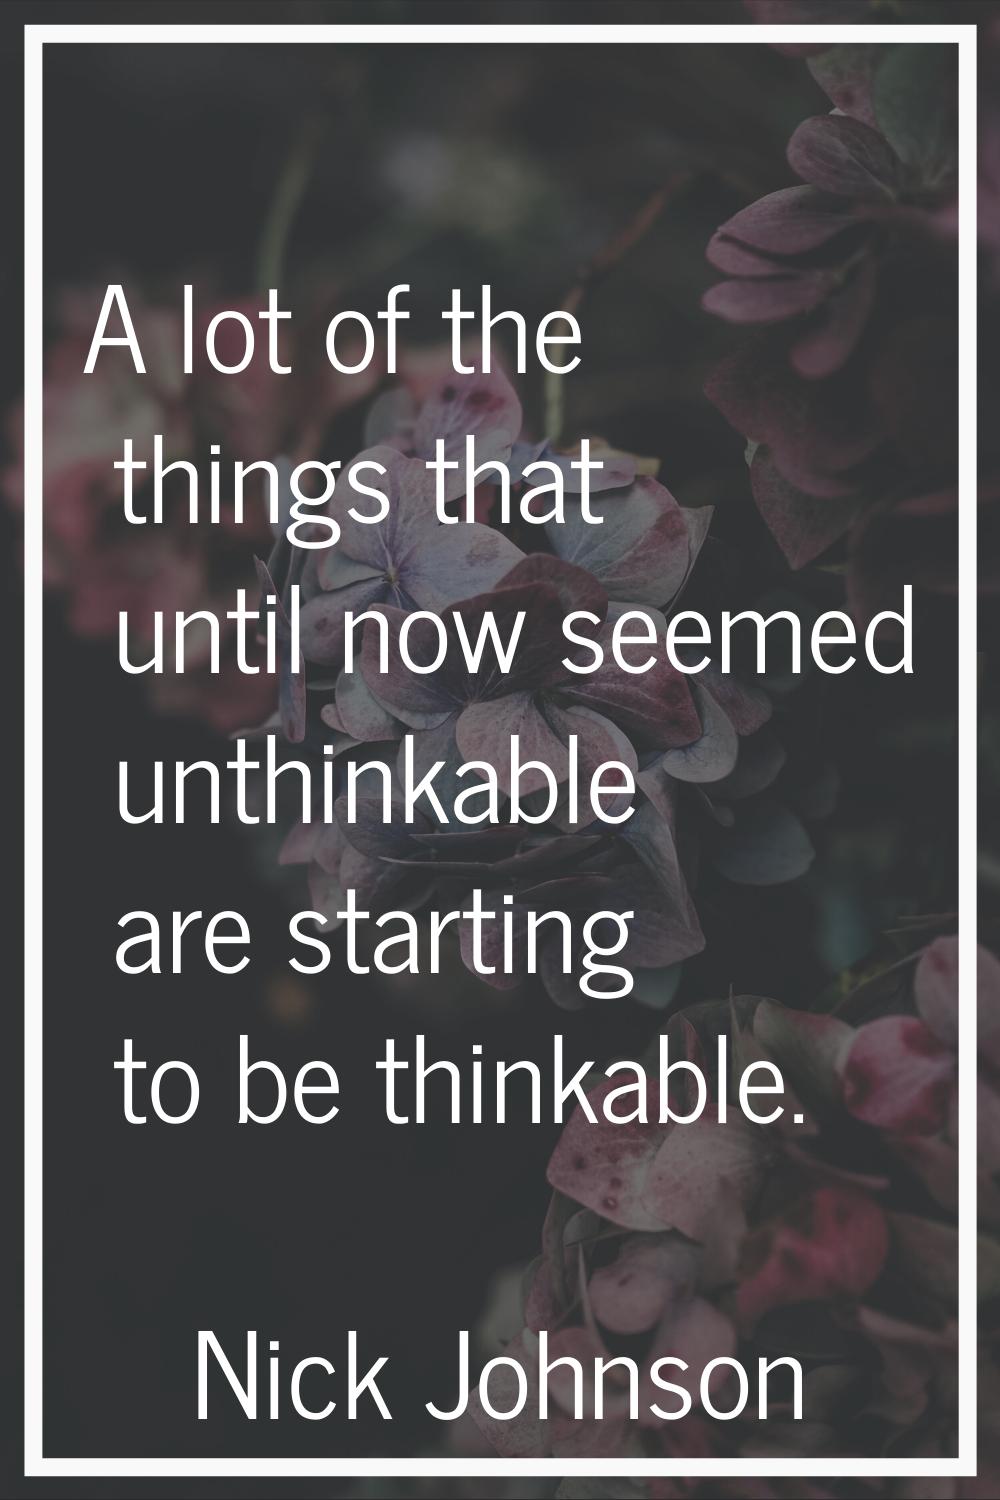 A lot of the things that until now seemed unthinkable are starting to be thinkable.